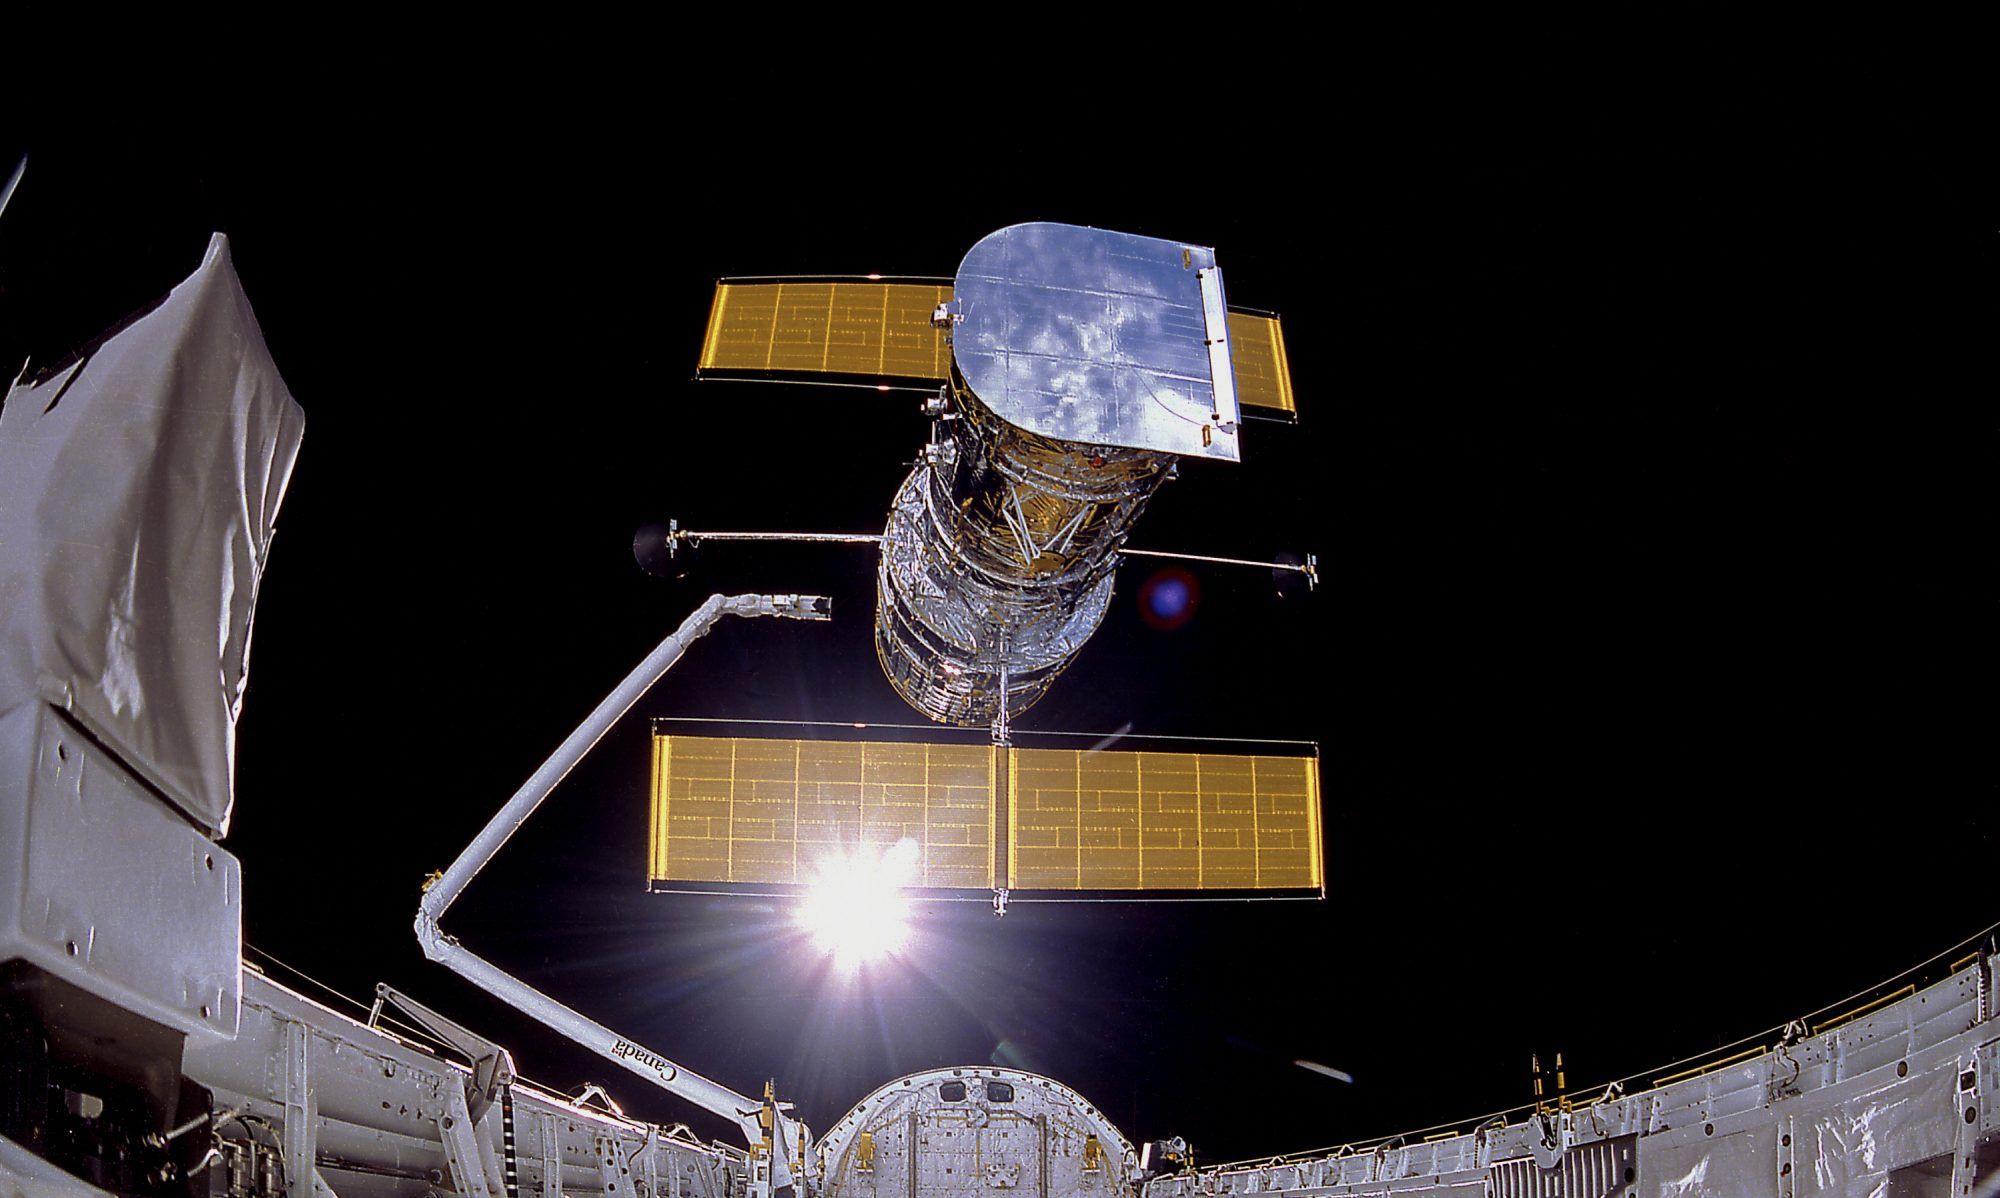 A cropped view of Hubble Space Telescope being deployed from the Space Shuttle in April 1990.